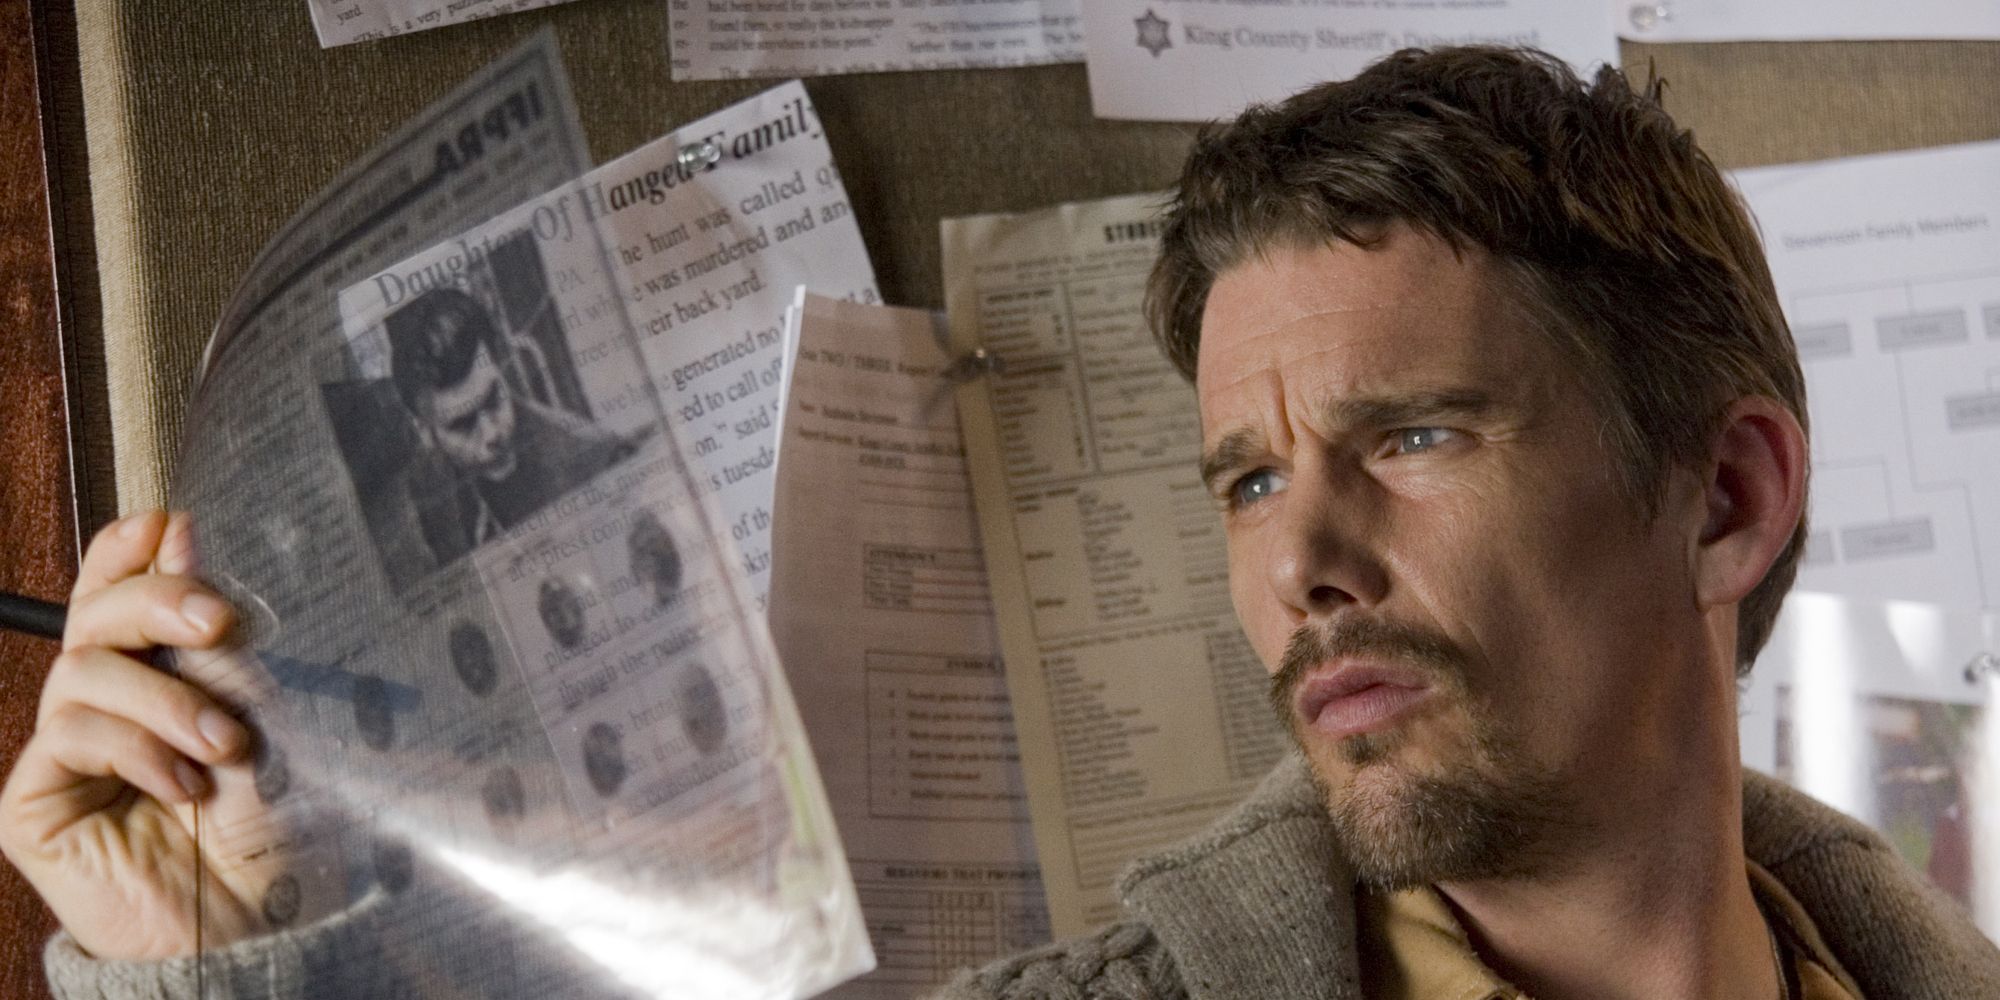 Ethan Hawke looking at a newspaper clipping from 'Sinister'